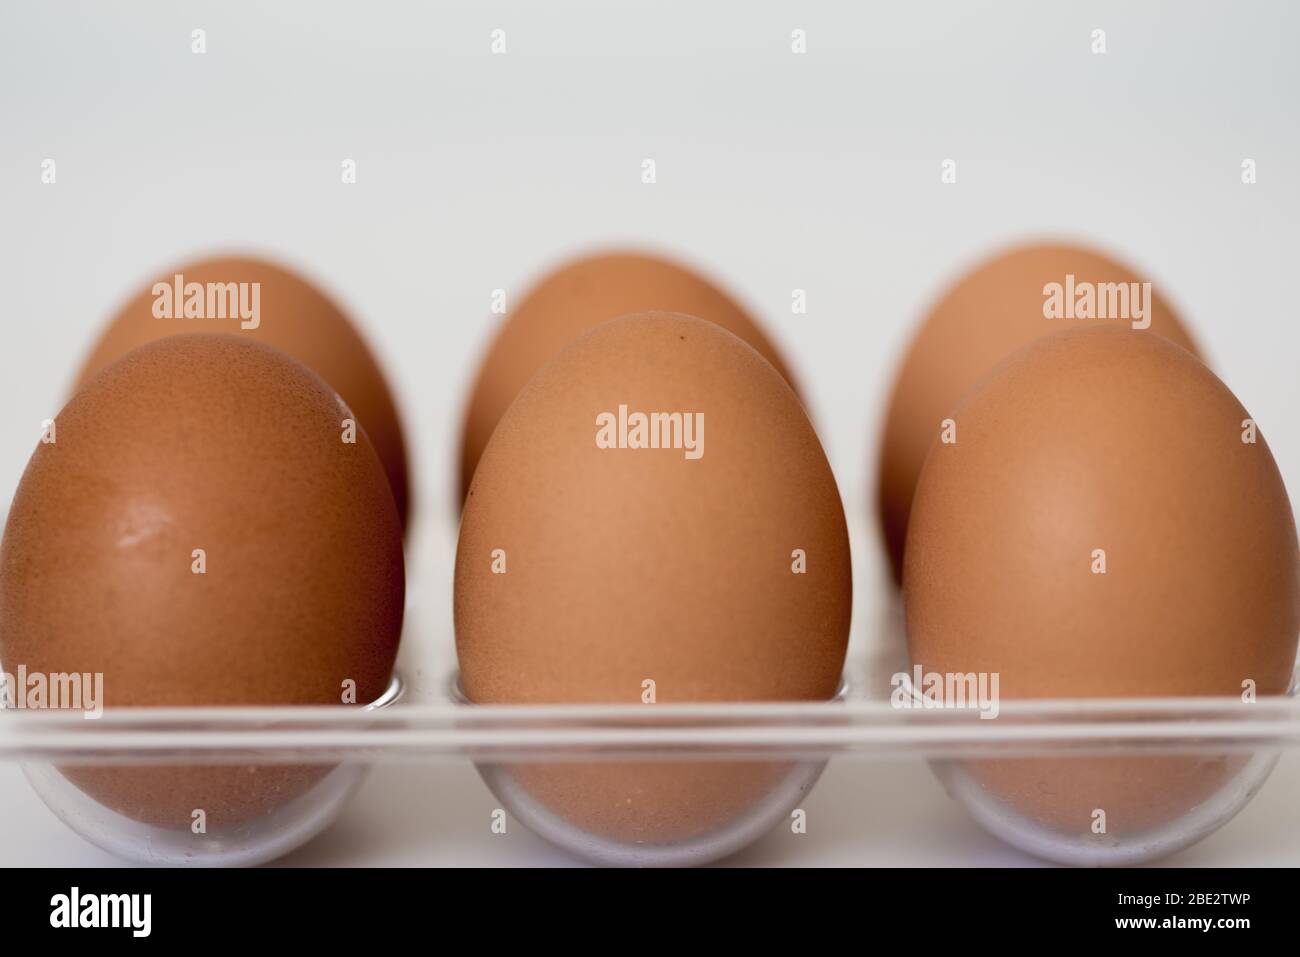 Eggs isolated in a tray with no marking Stock Photo